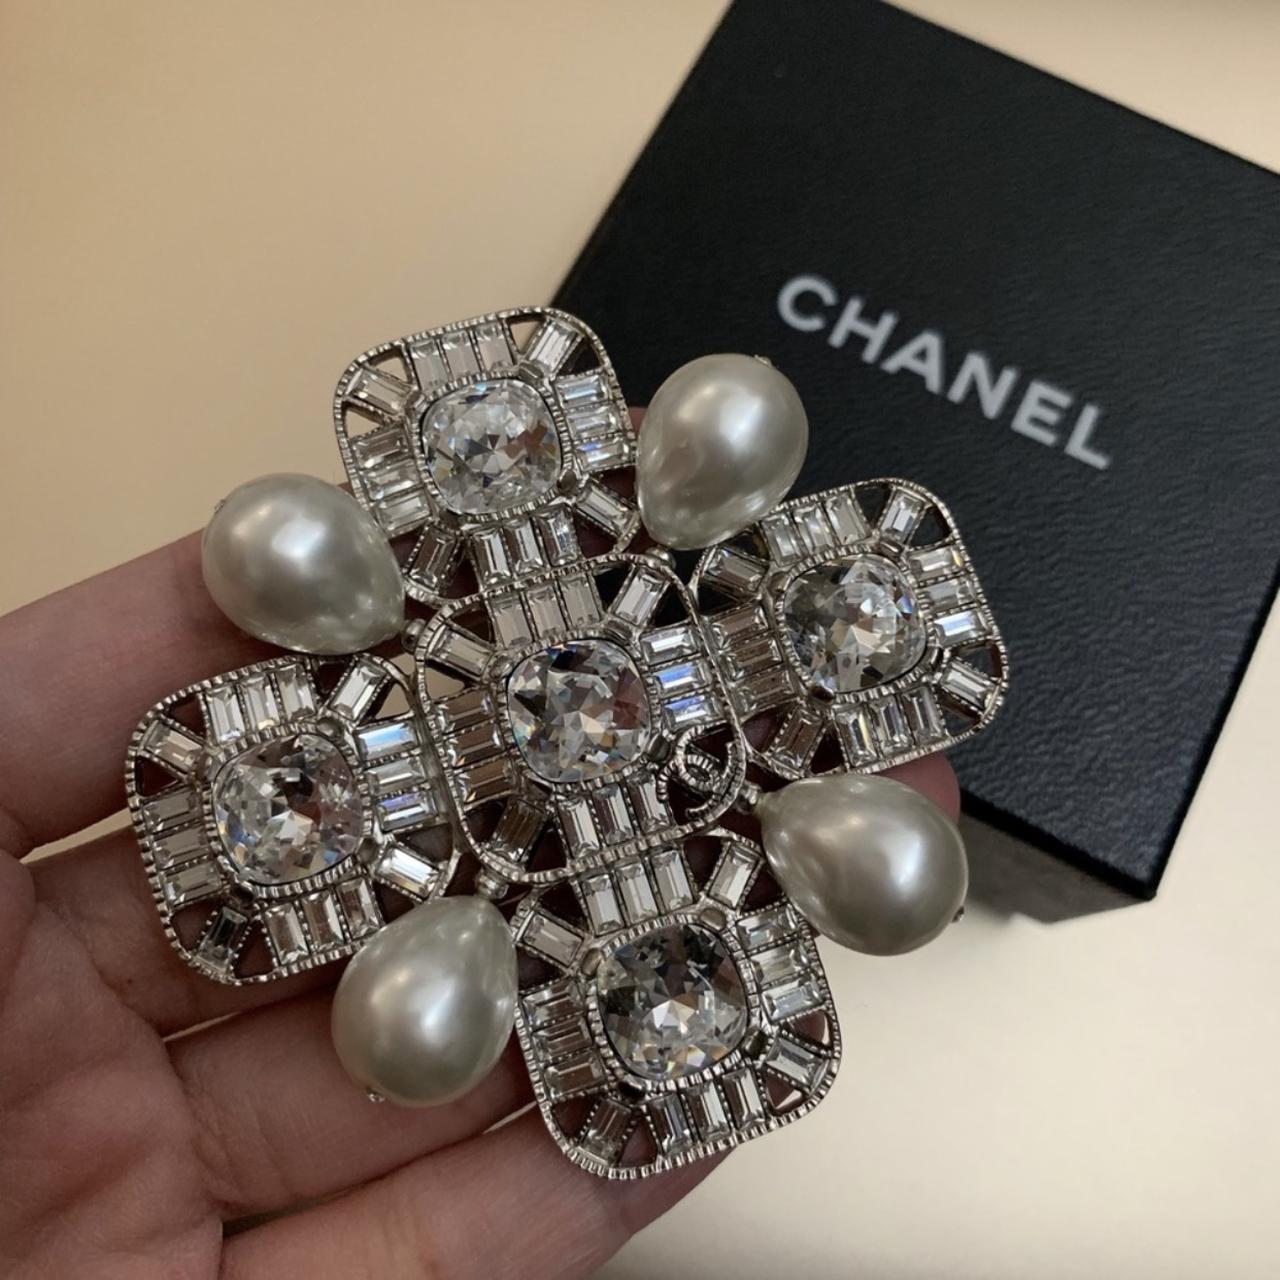 Chanel broach. Large pearls and crystals. Crystal - Depop